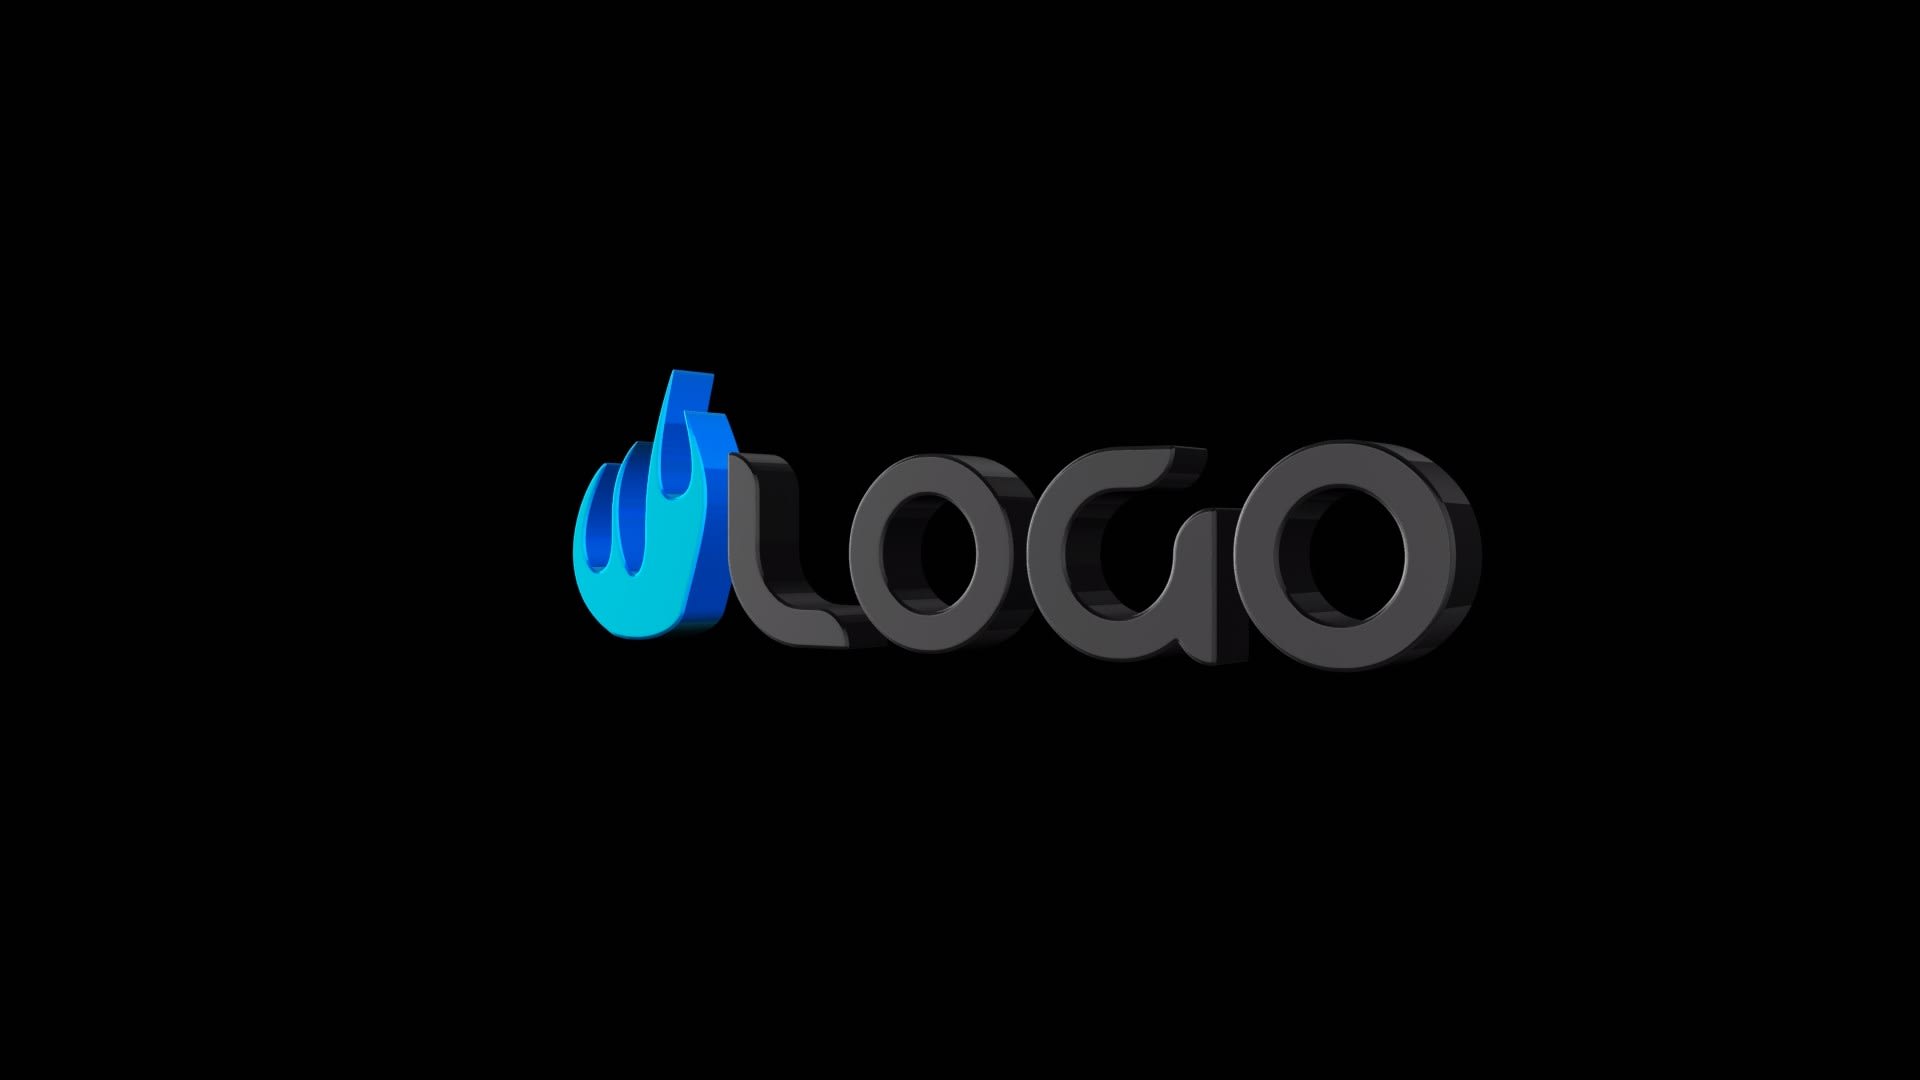 Do 3d rotating logo animation in seamless loop by Shaquinox | Fiverr